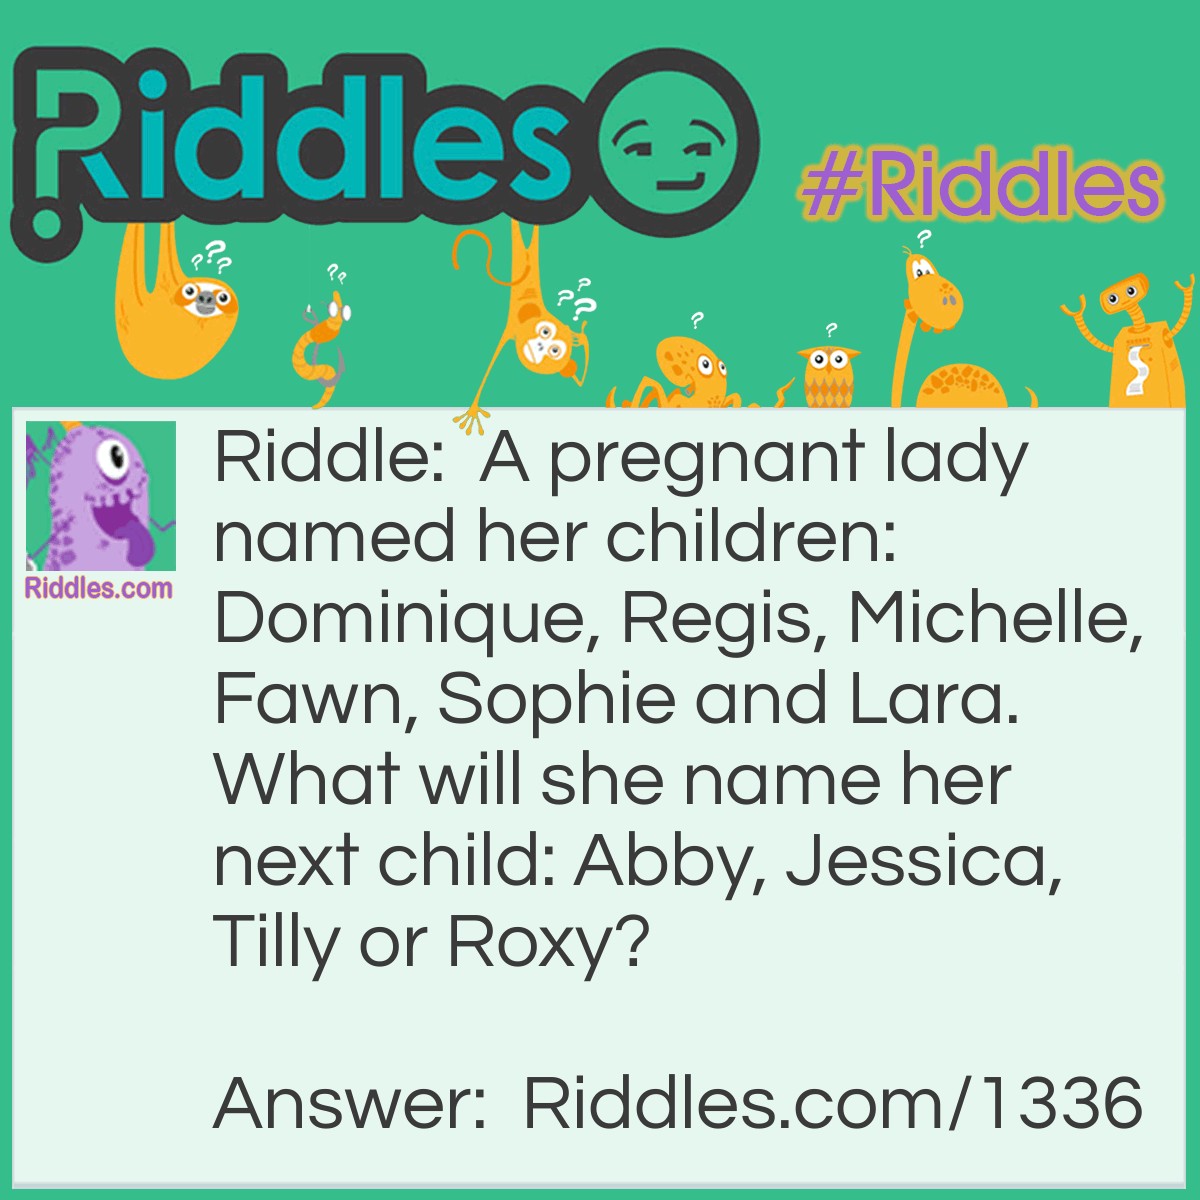 Riddle: A pregnant lady named her children: Dominique, Regis, Michelle, Fawn, Sophie and Lara. What will she name her next child: Abby, Jessica, Tilly or Roxy? Answer: Tilly Look at the first 2 letters of each name Do Re Mi Fa So La